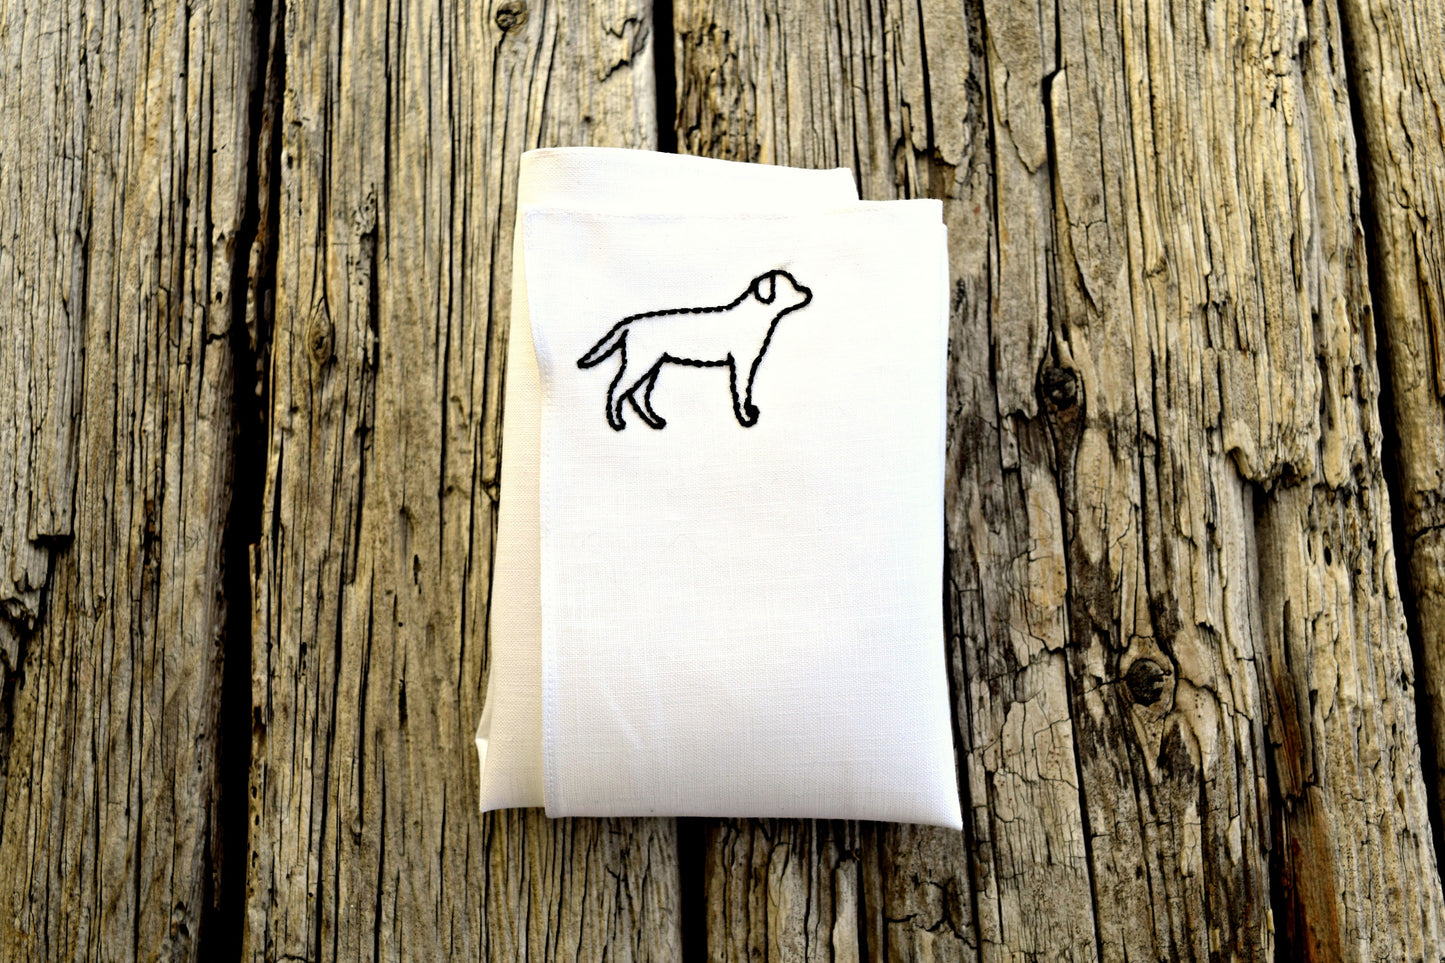 Folded white linen handkerchief embroidered with an outline of a black labrador retriever in one corner